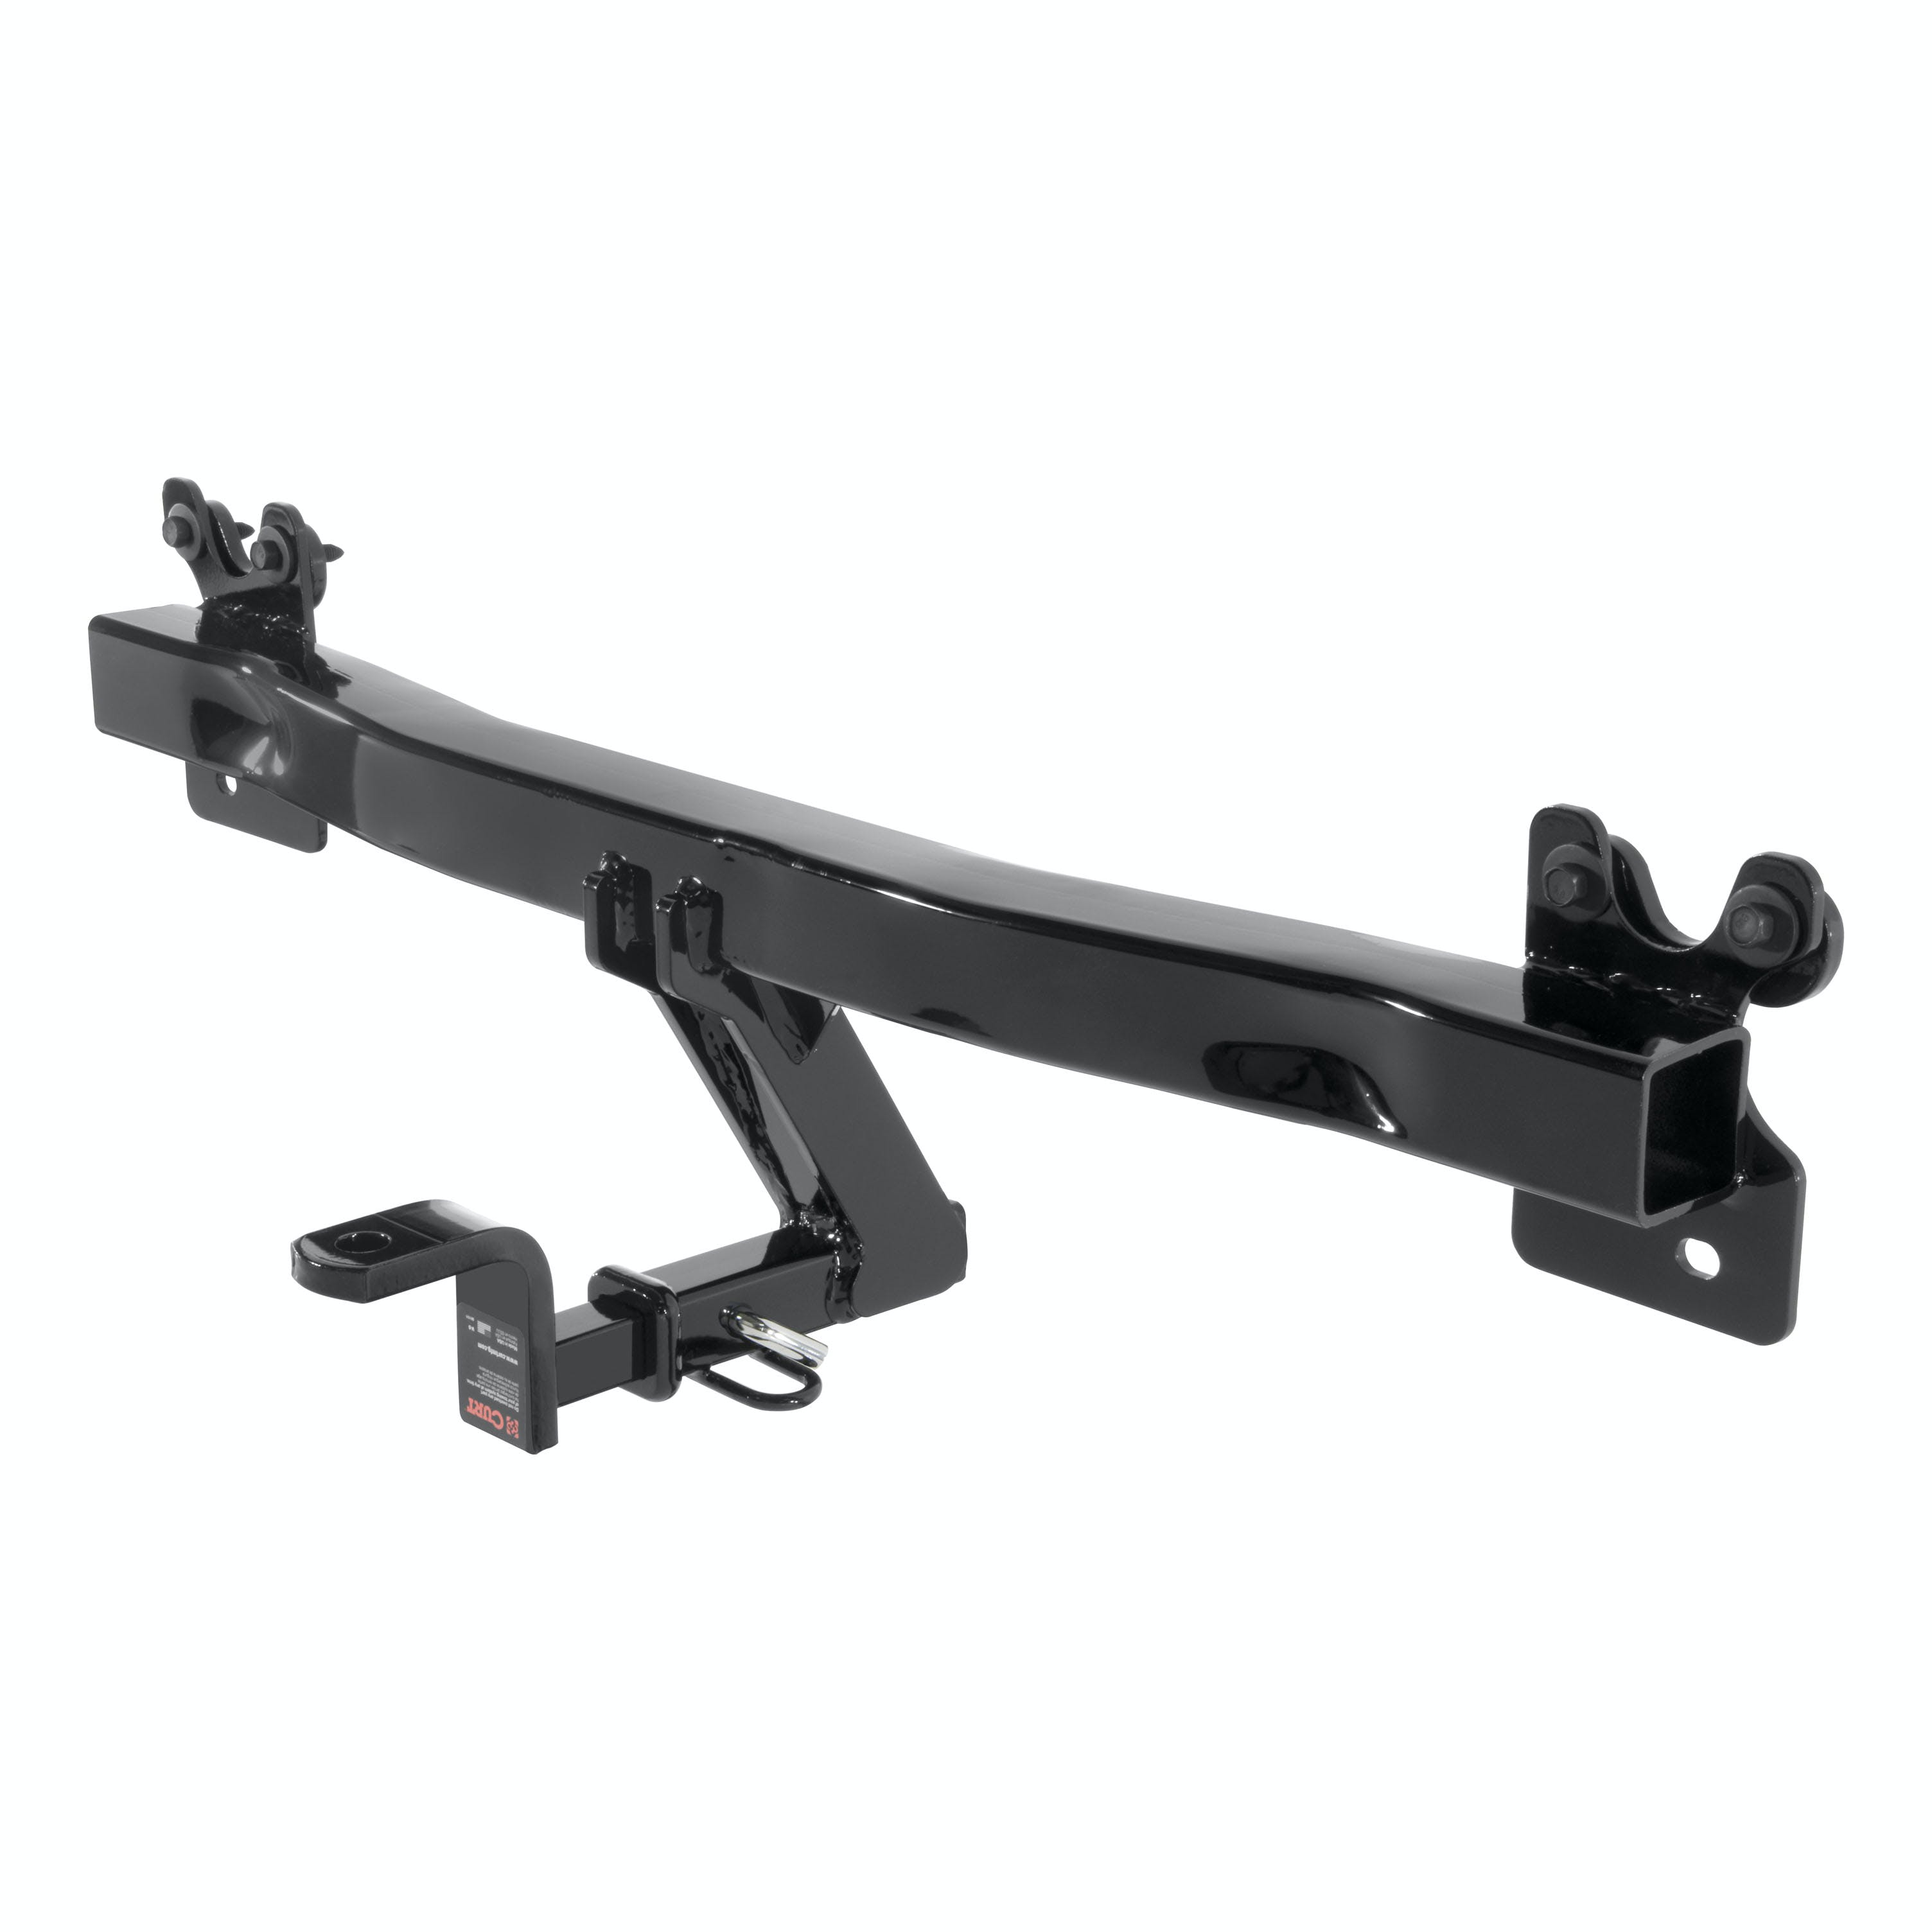 CURT 120663 Class 2 Hitch, 1-1/4 Mount, Select Volvo S60, V60, Cross Country, V70, XC70